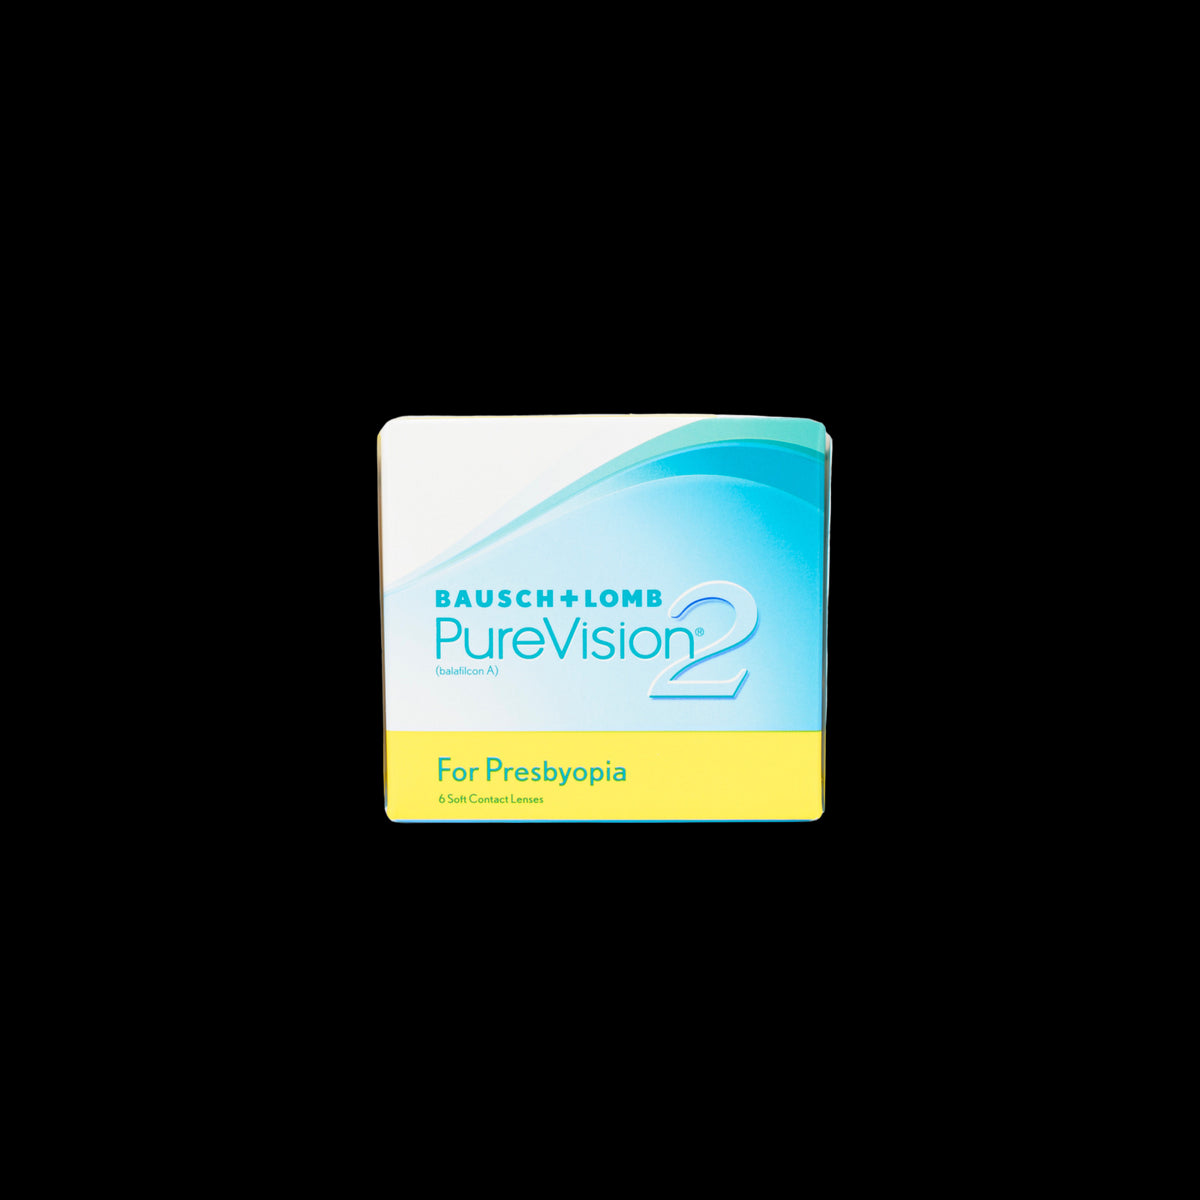 PureVision 2 Multifocal 6P Contact Lenses Bausch & Lomb   